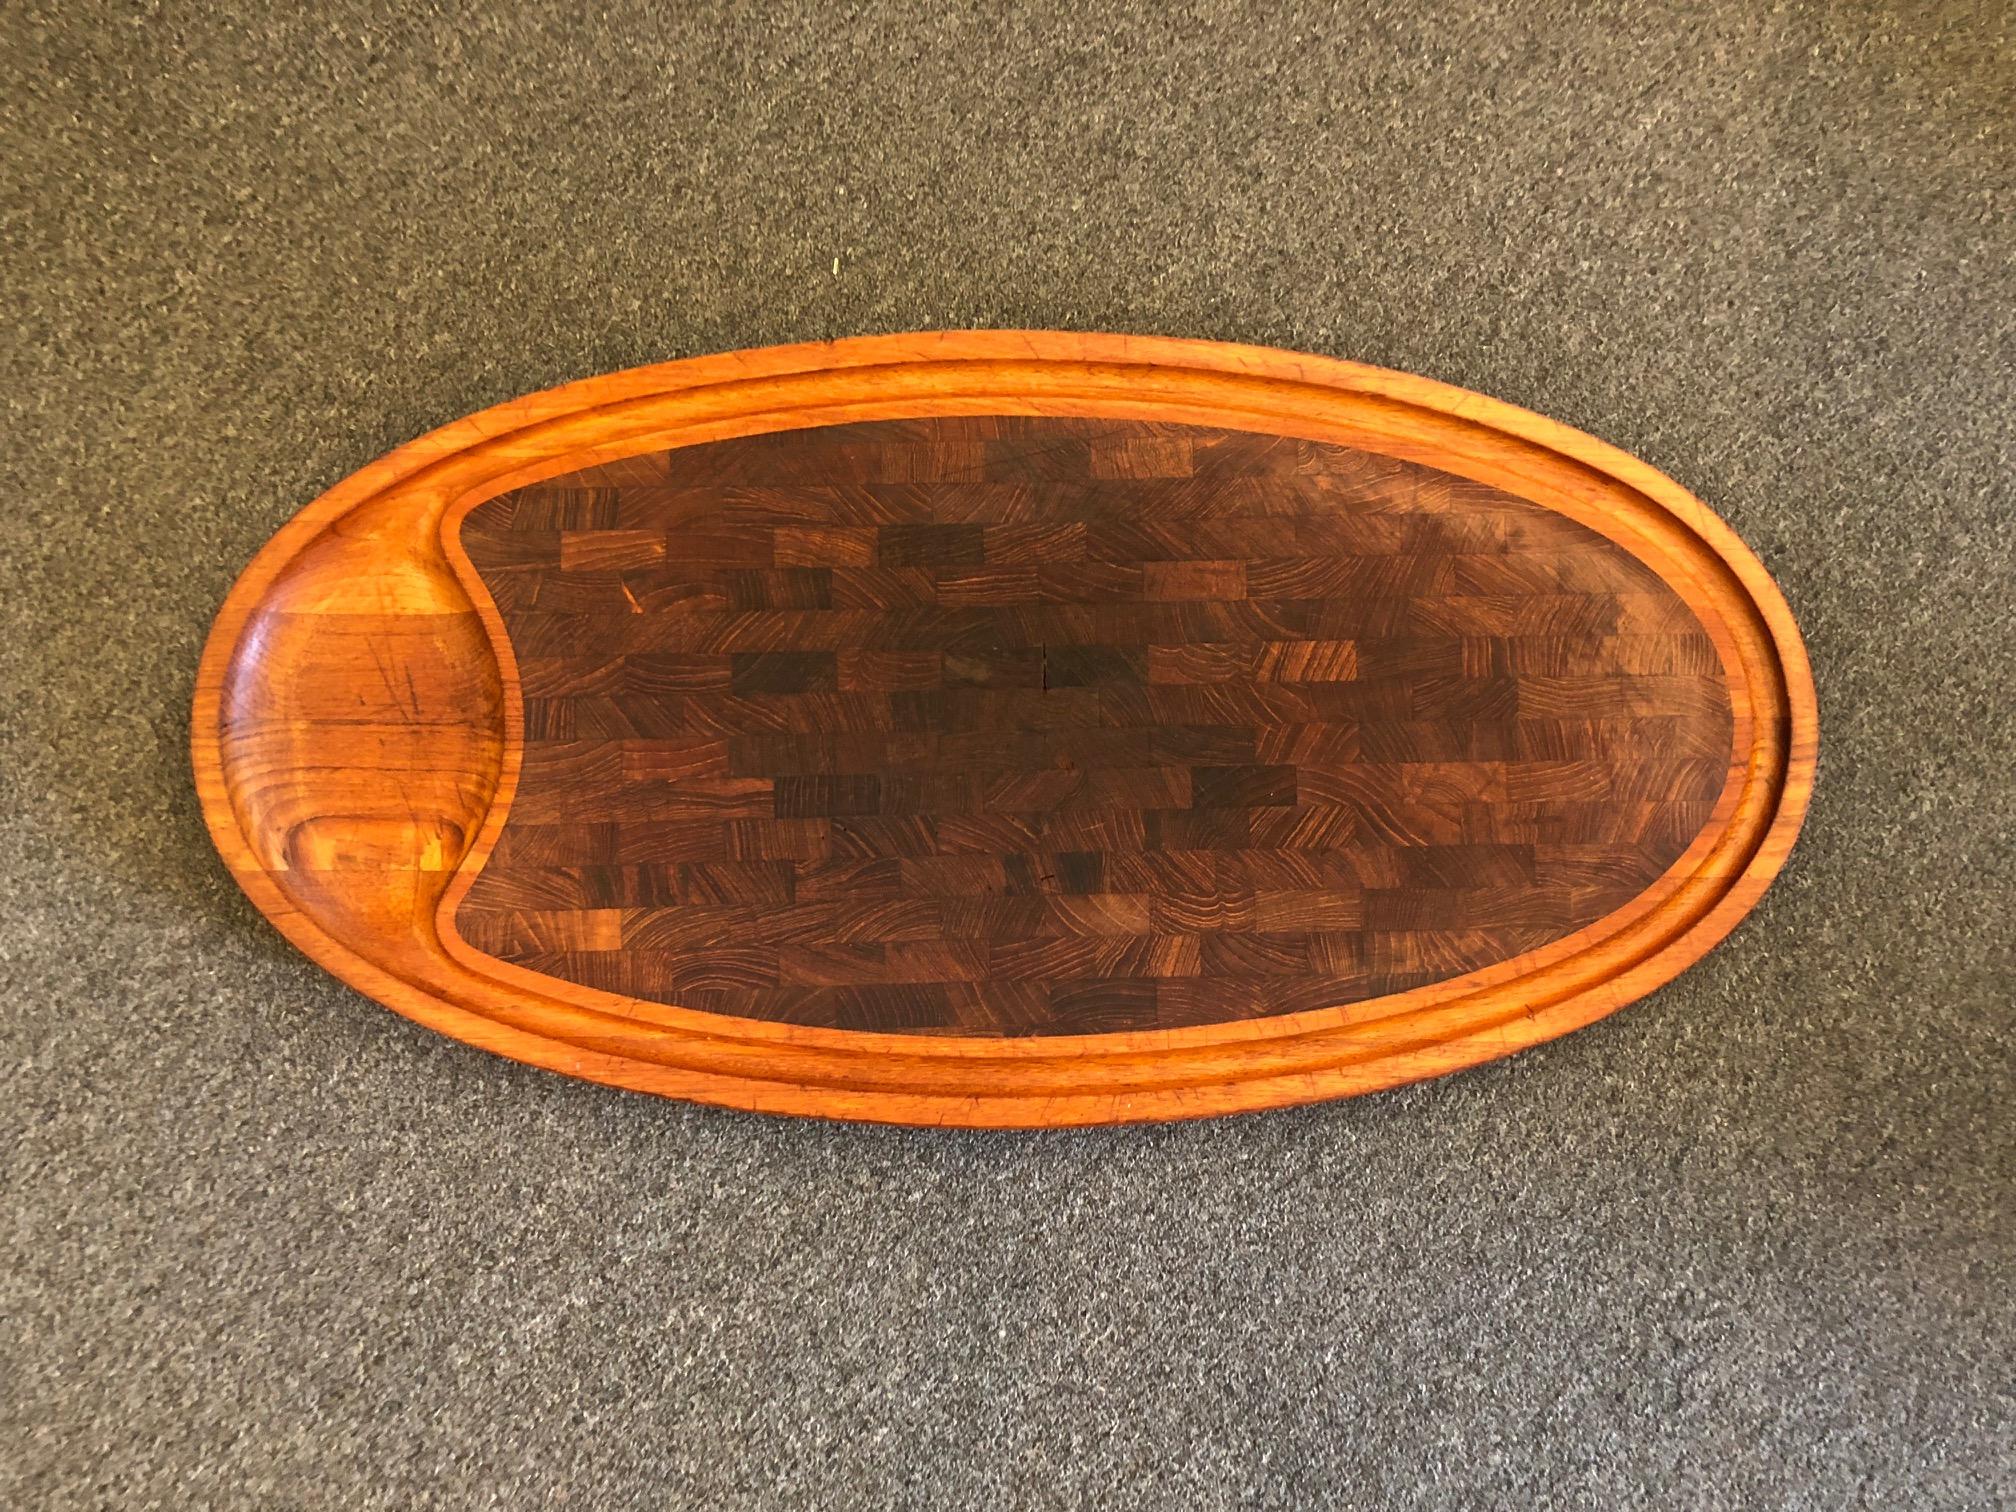 Massive solid teak butcher block cutting board designed by Jens Quistgaard for Dansk, circa 1950s. The piece is 30